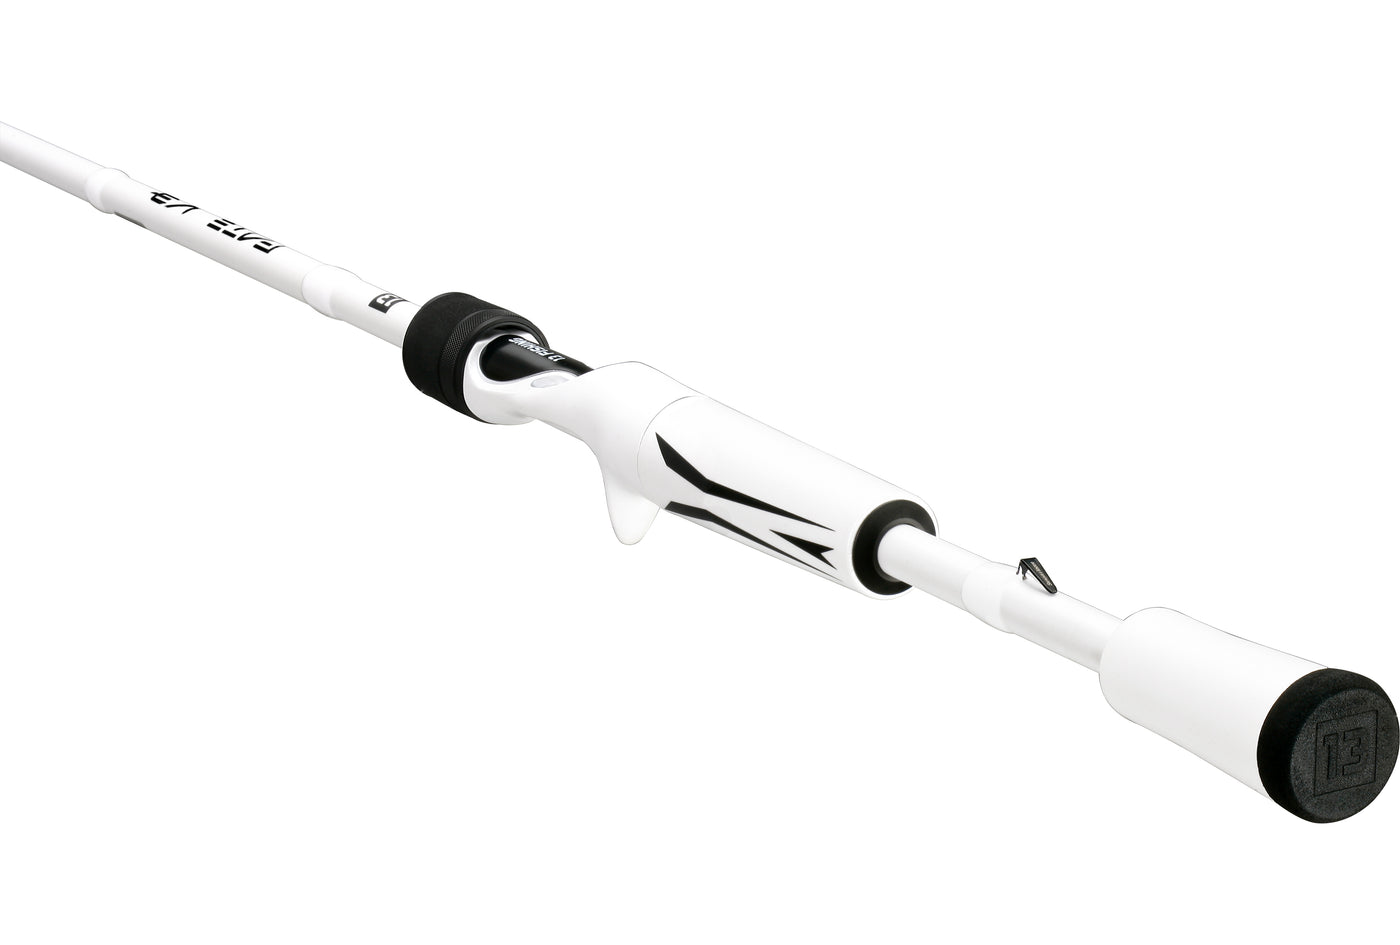 CANNE CASTING 13 FISHING FATE V3 6'10 2M08 5-20G - PECHE DES CARNASSIERS